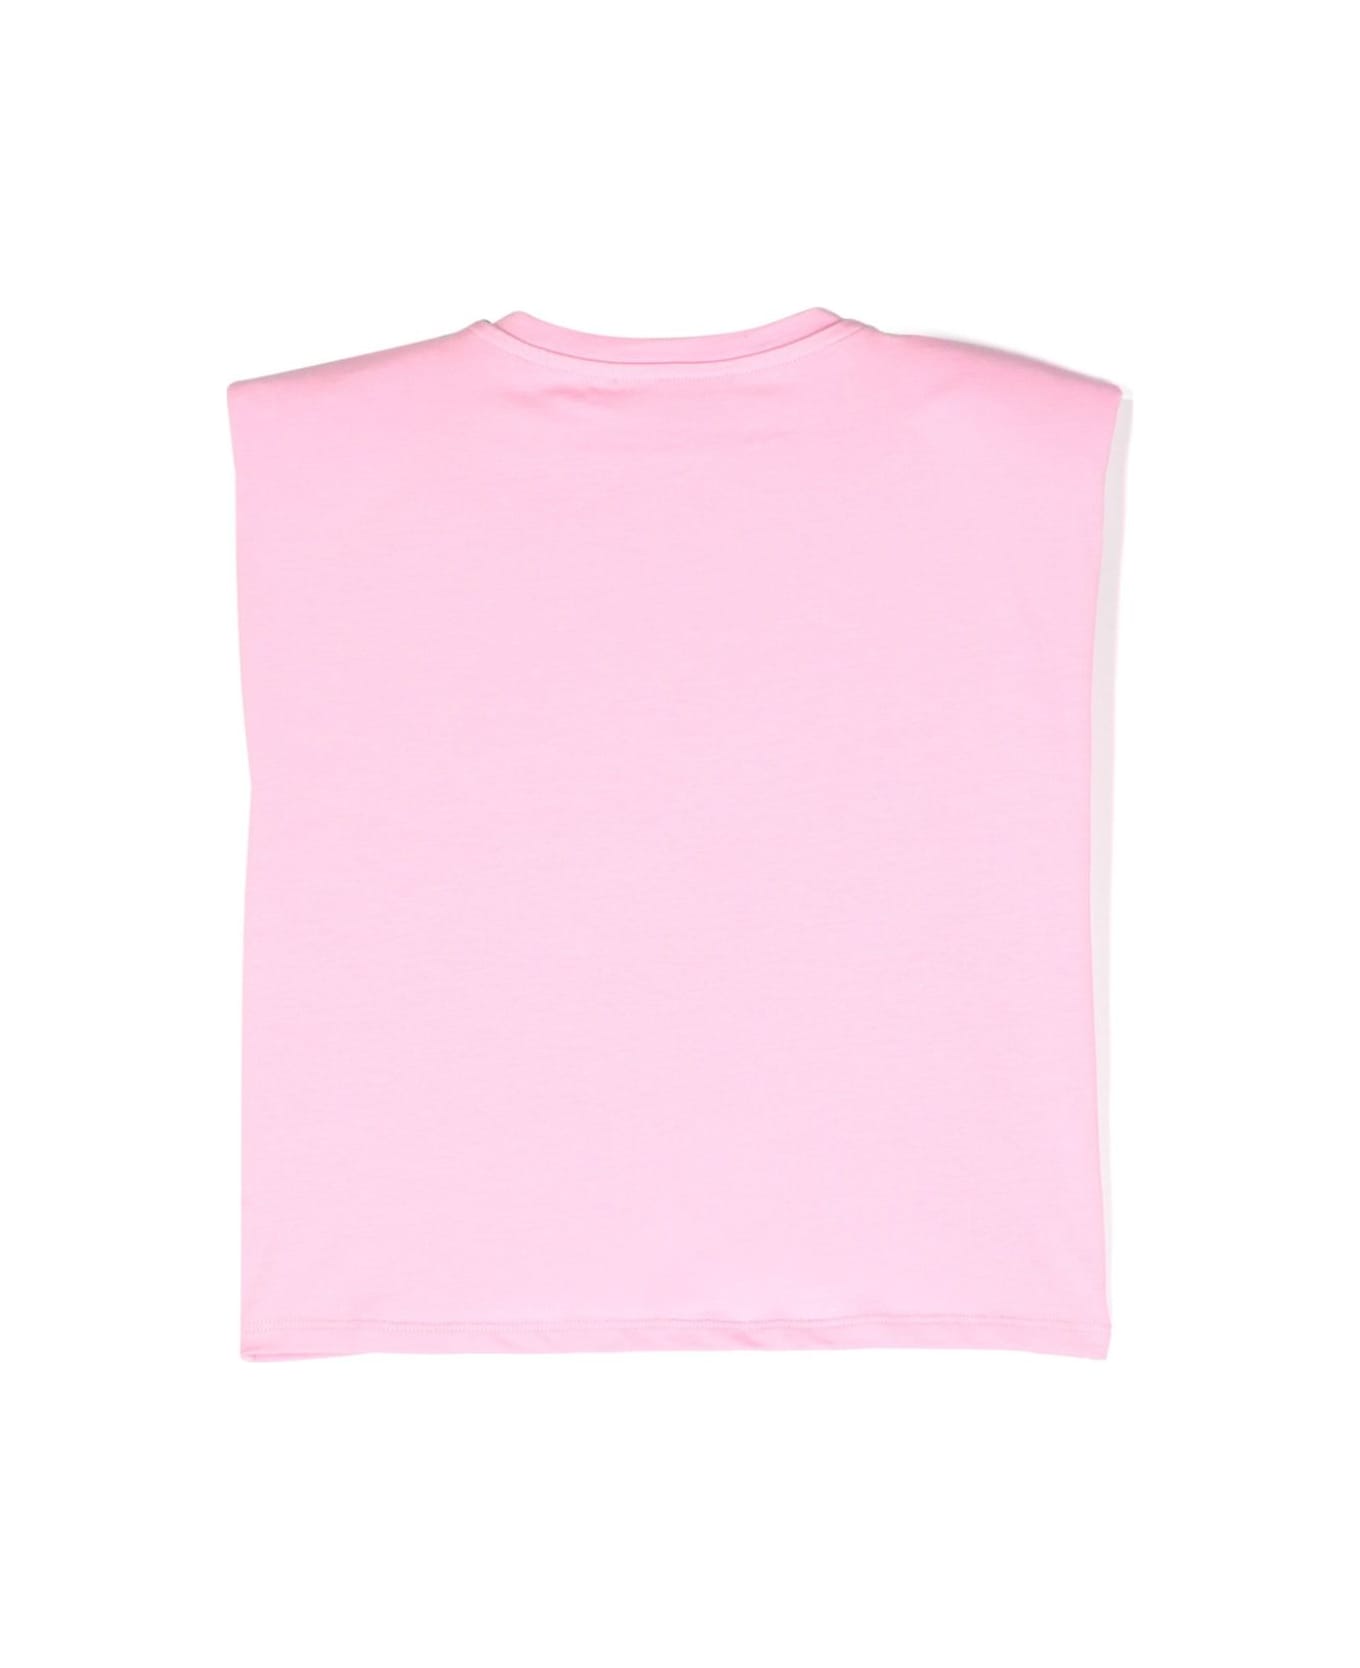 Miss Blumarine Pink T-shirt With Flowers And Ruffles - Pink